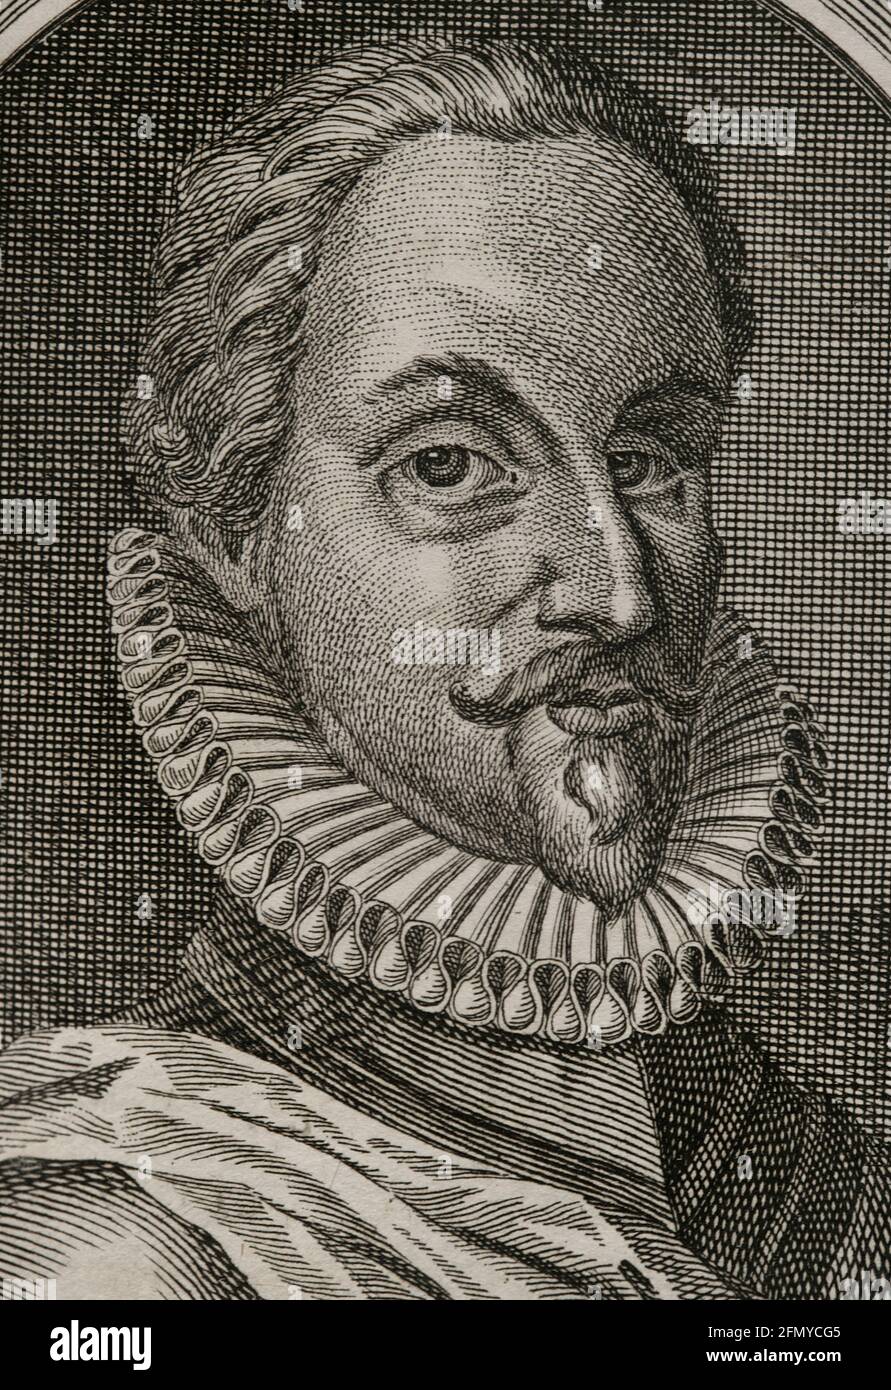 Adolf van Nieuwenaar (1545-1589). Count of Limburg and Moers. Stadtholder of Guelders, Utrecht and Overijssel for the States General of the Netherlands during the Eighty Years' War. Portrait. Engraving, detail. Wars of Flanders. Edition published in Antwerp, 1748. Stock Photo